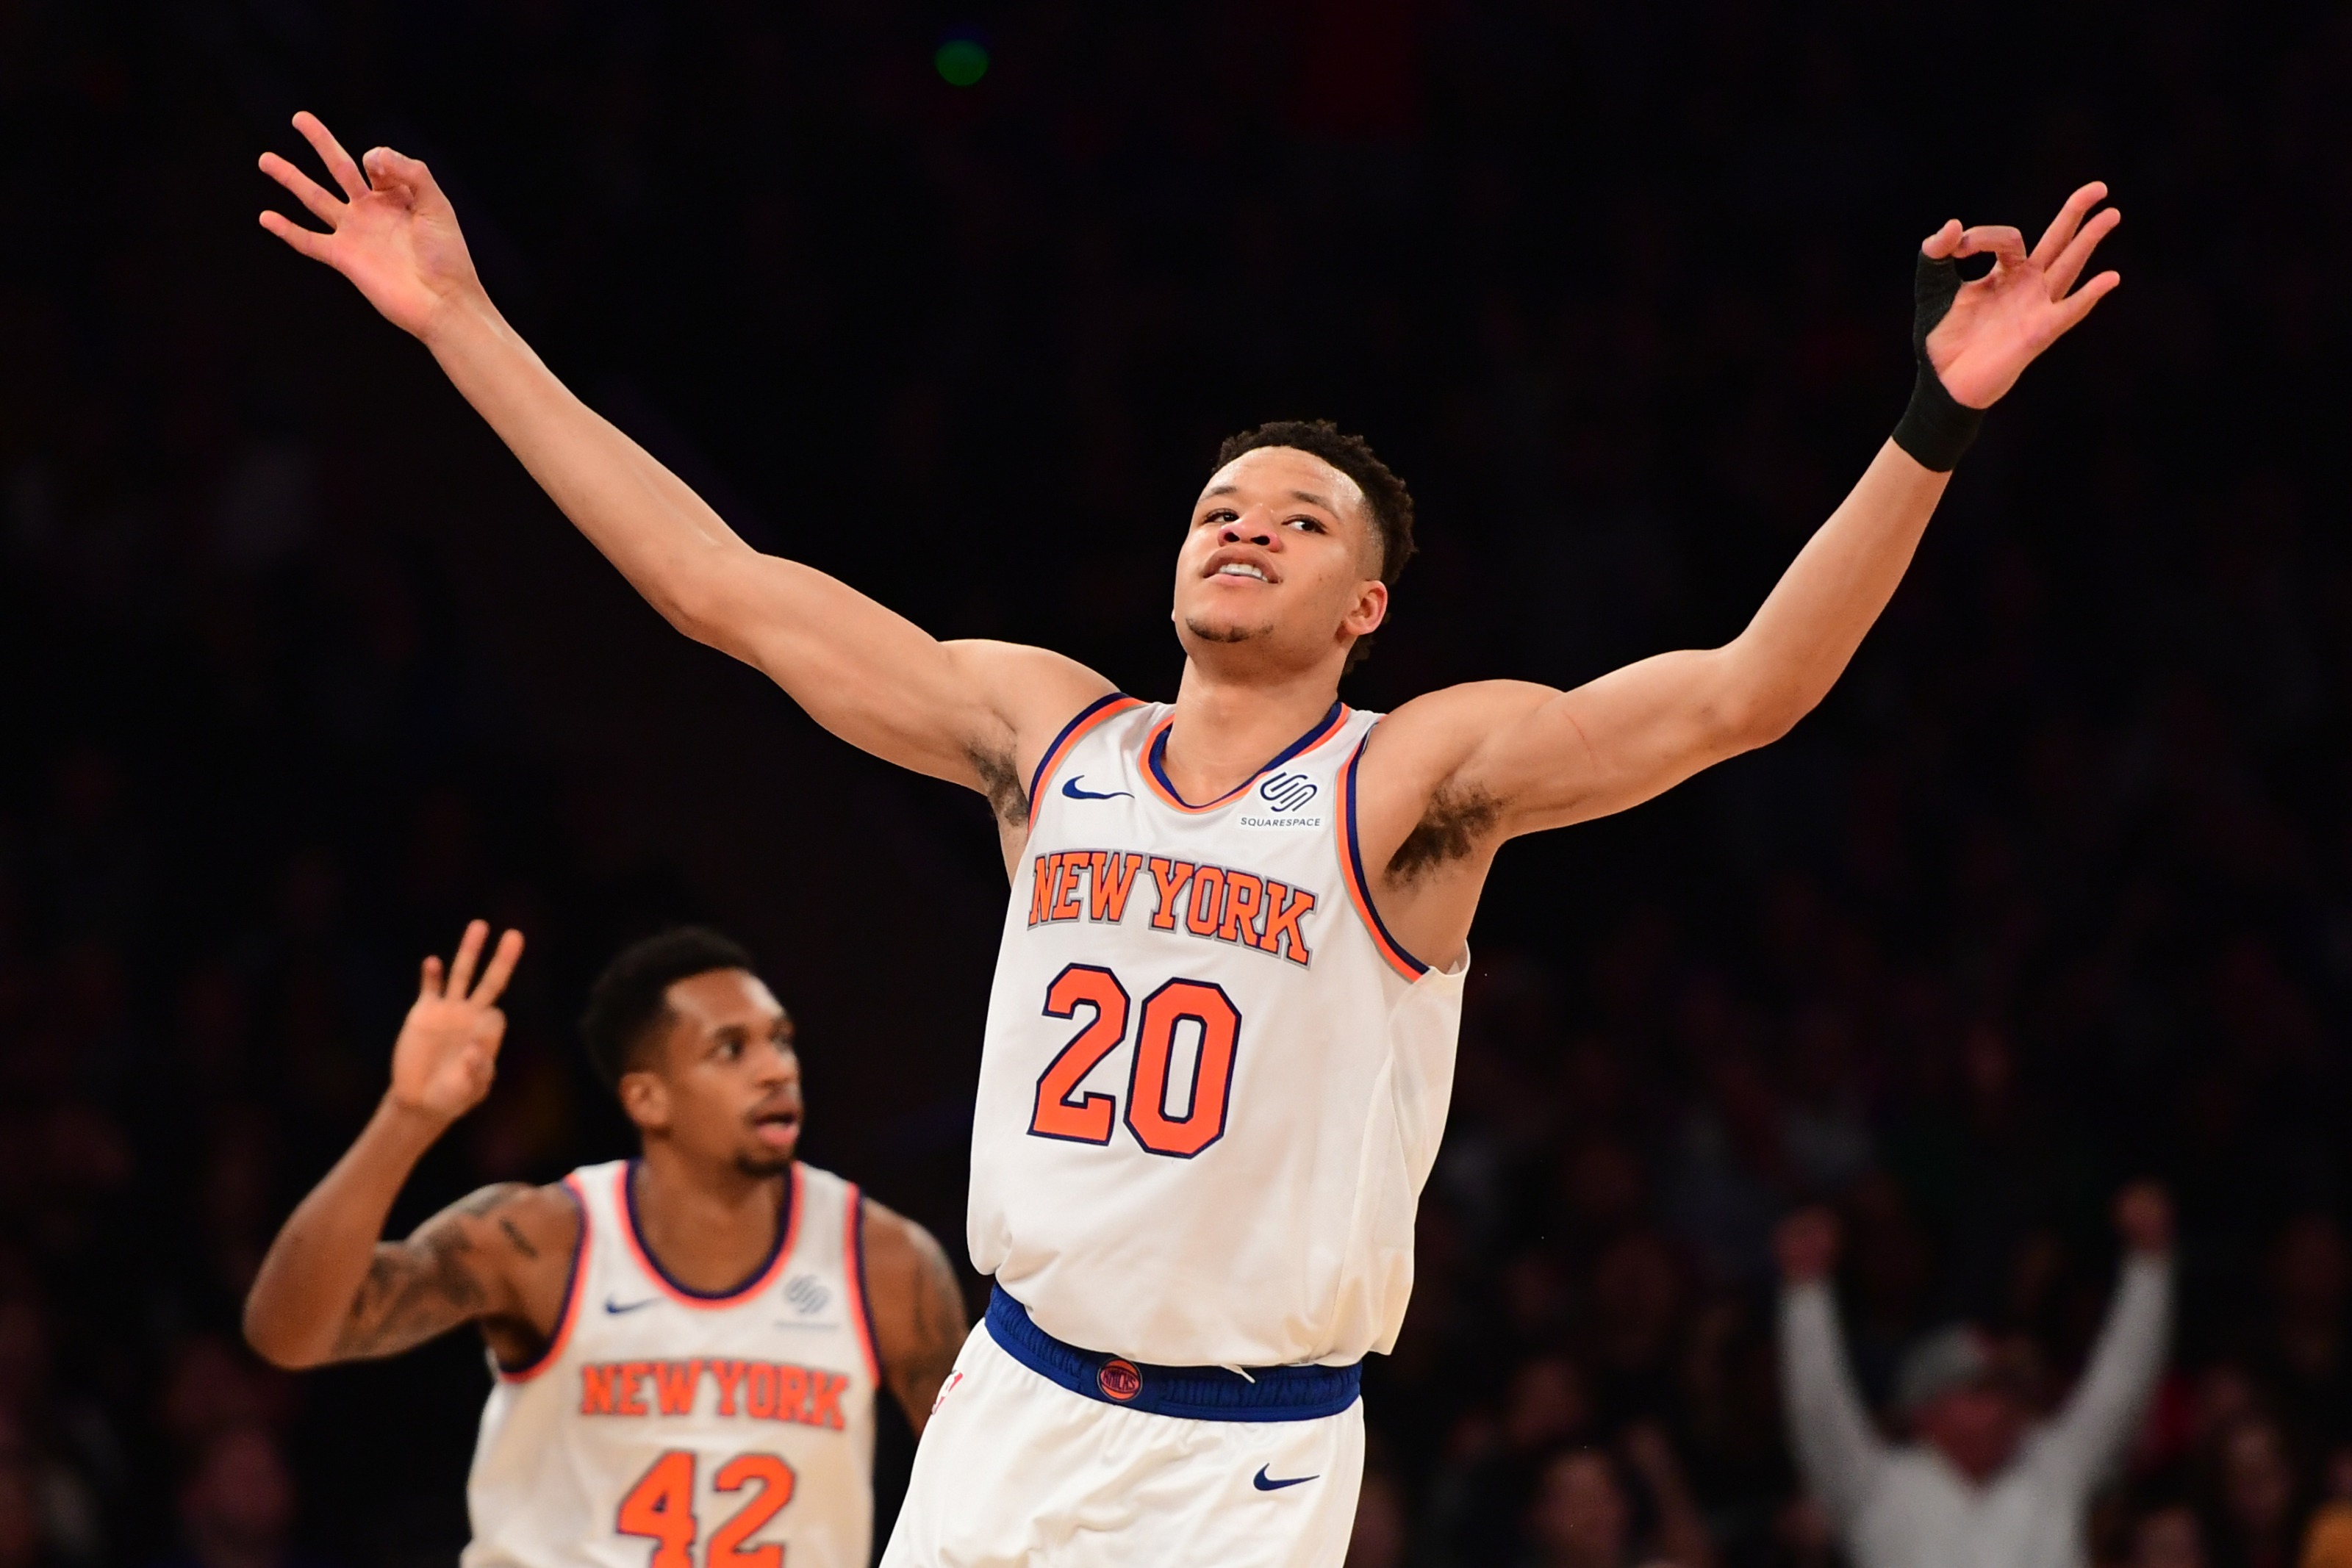 The Knicks' Kevin Knox, A Reclamation Project or Draft Day Miss? –